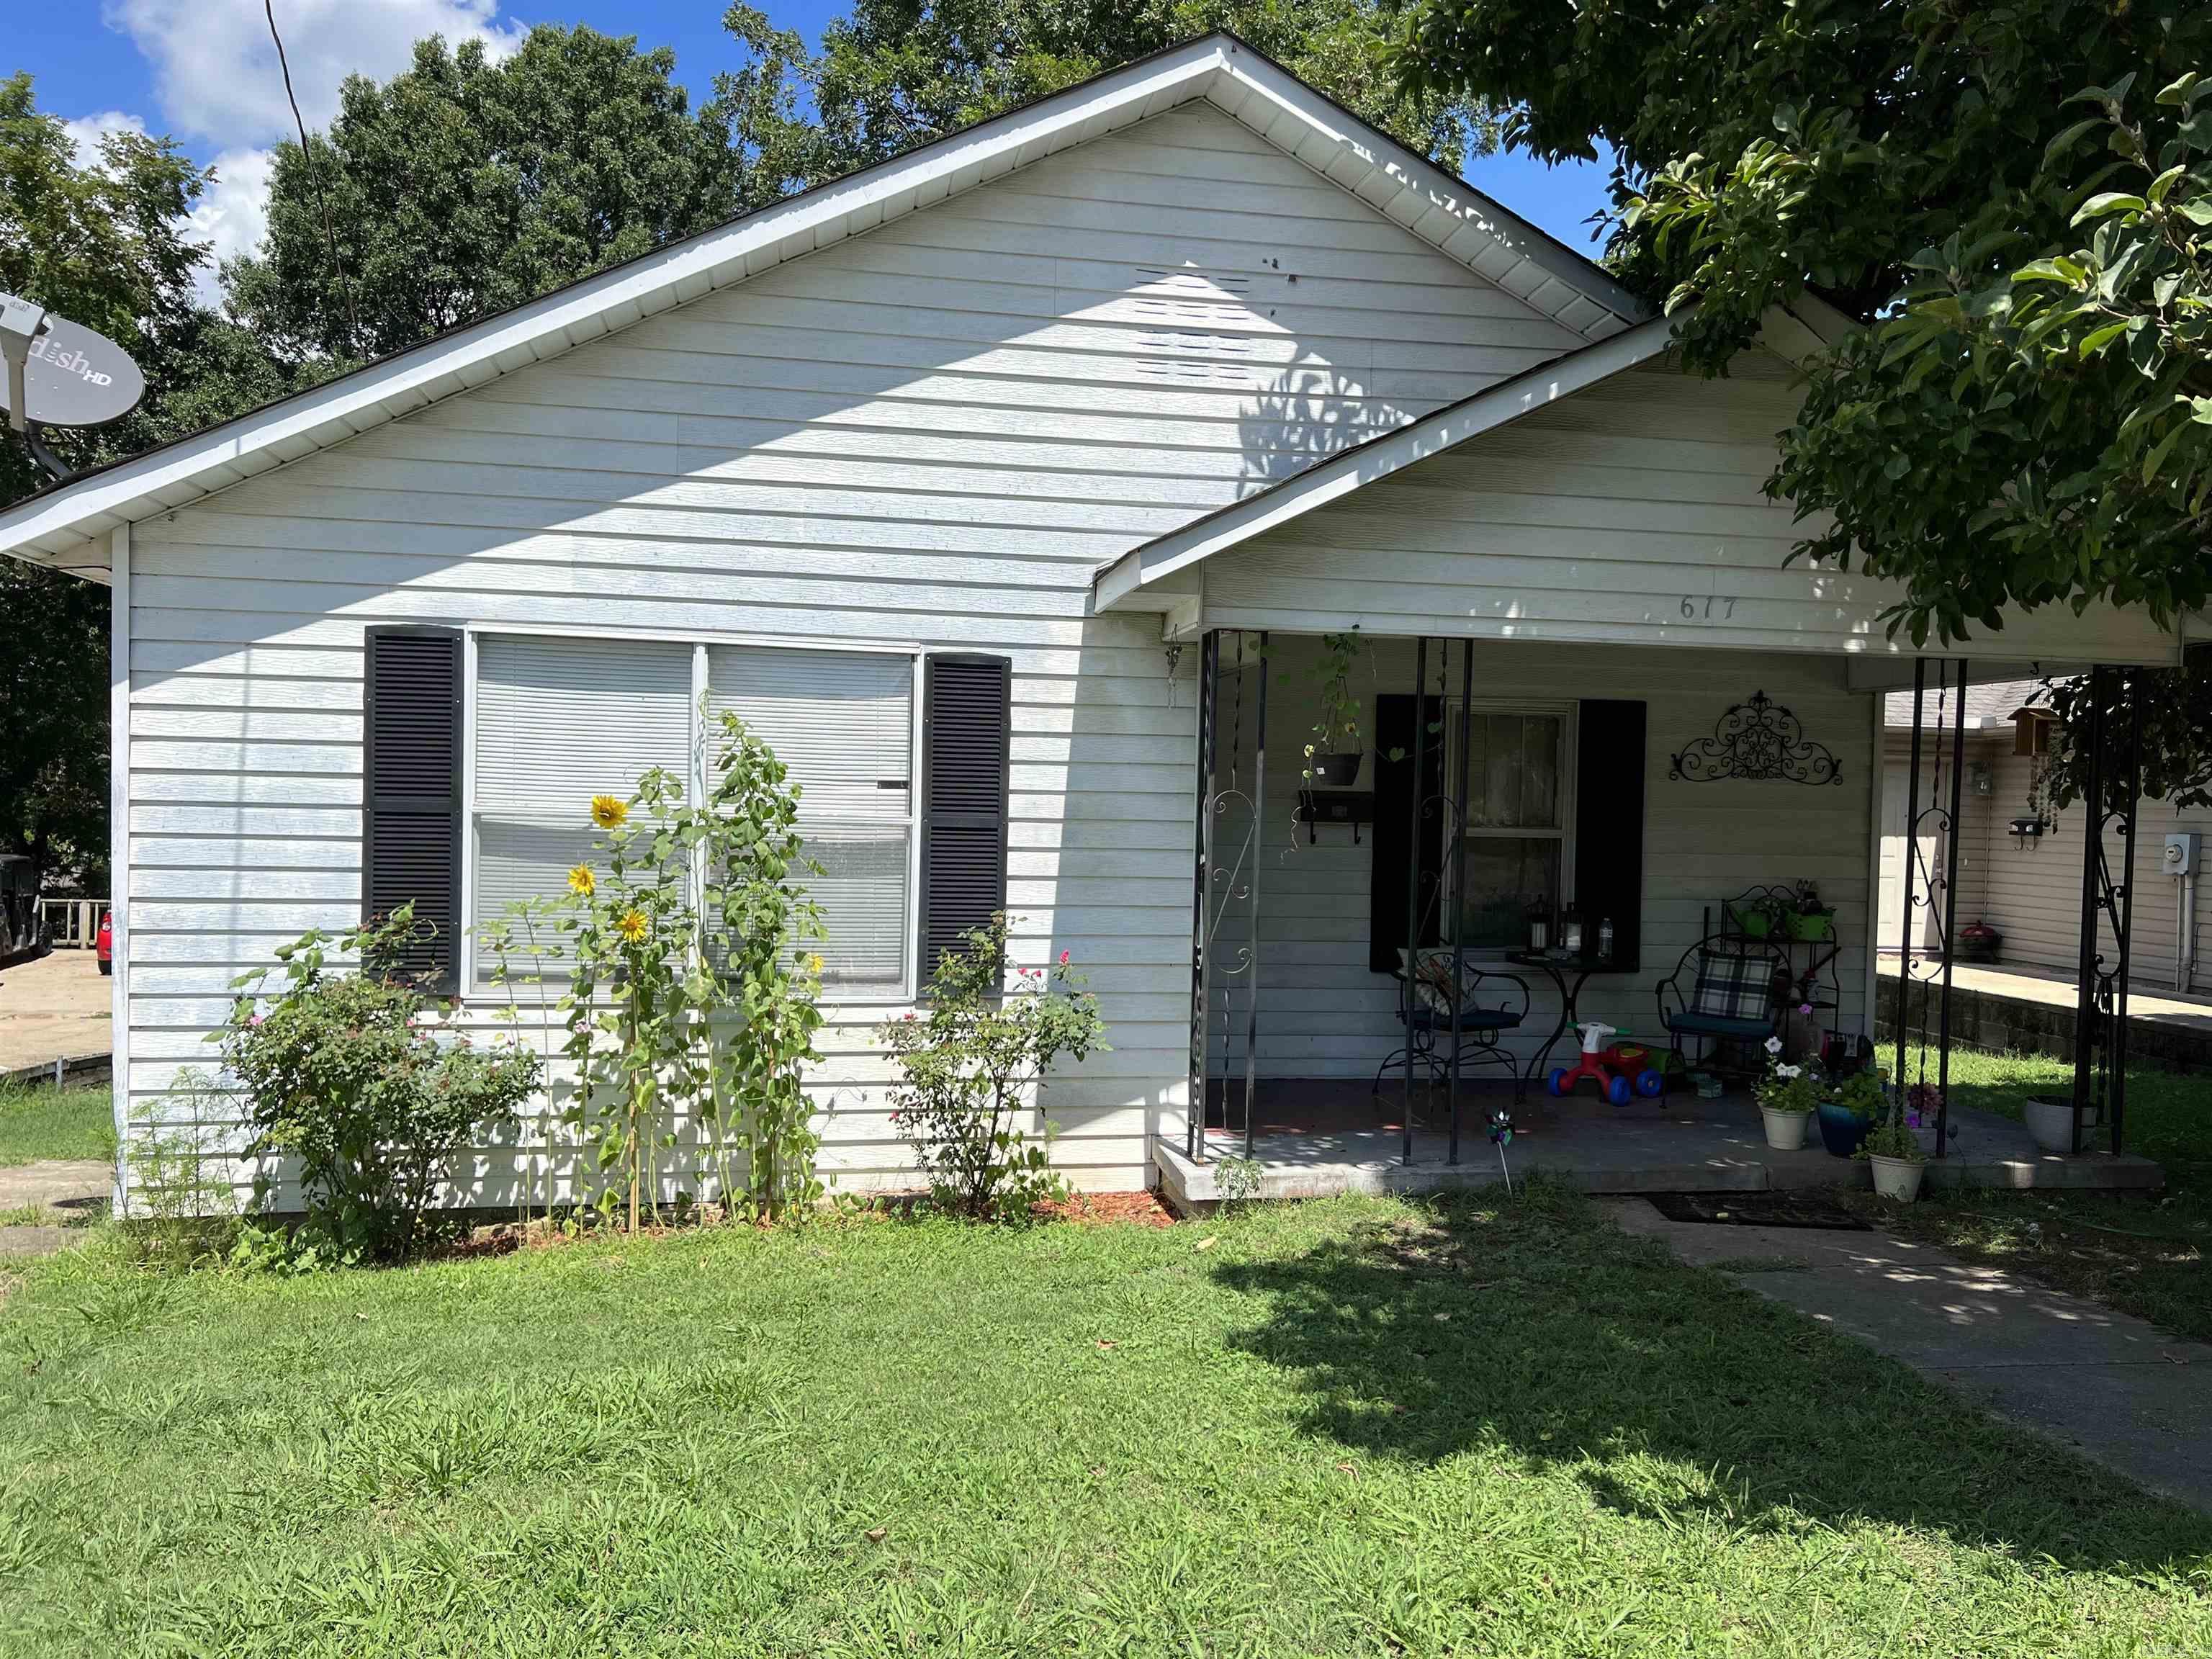 Charming 2 bedroom 1 bath home with a covered porch on the front and a deck on the back.  This home is currently being rented.  See agent comments.